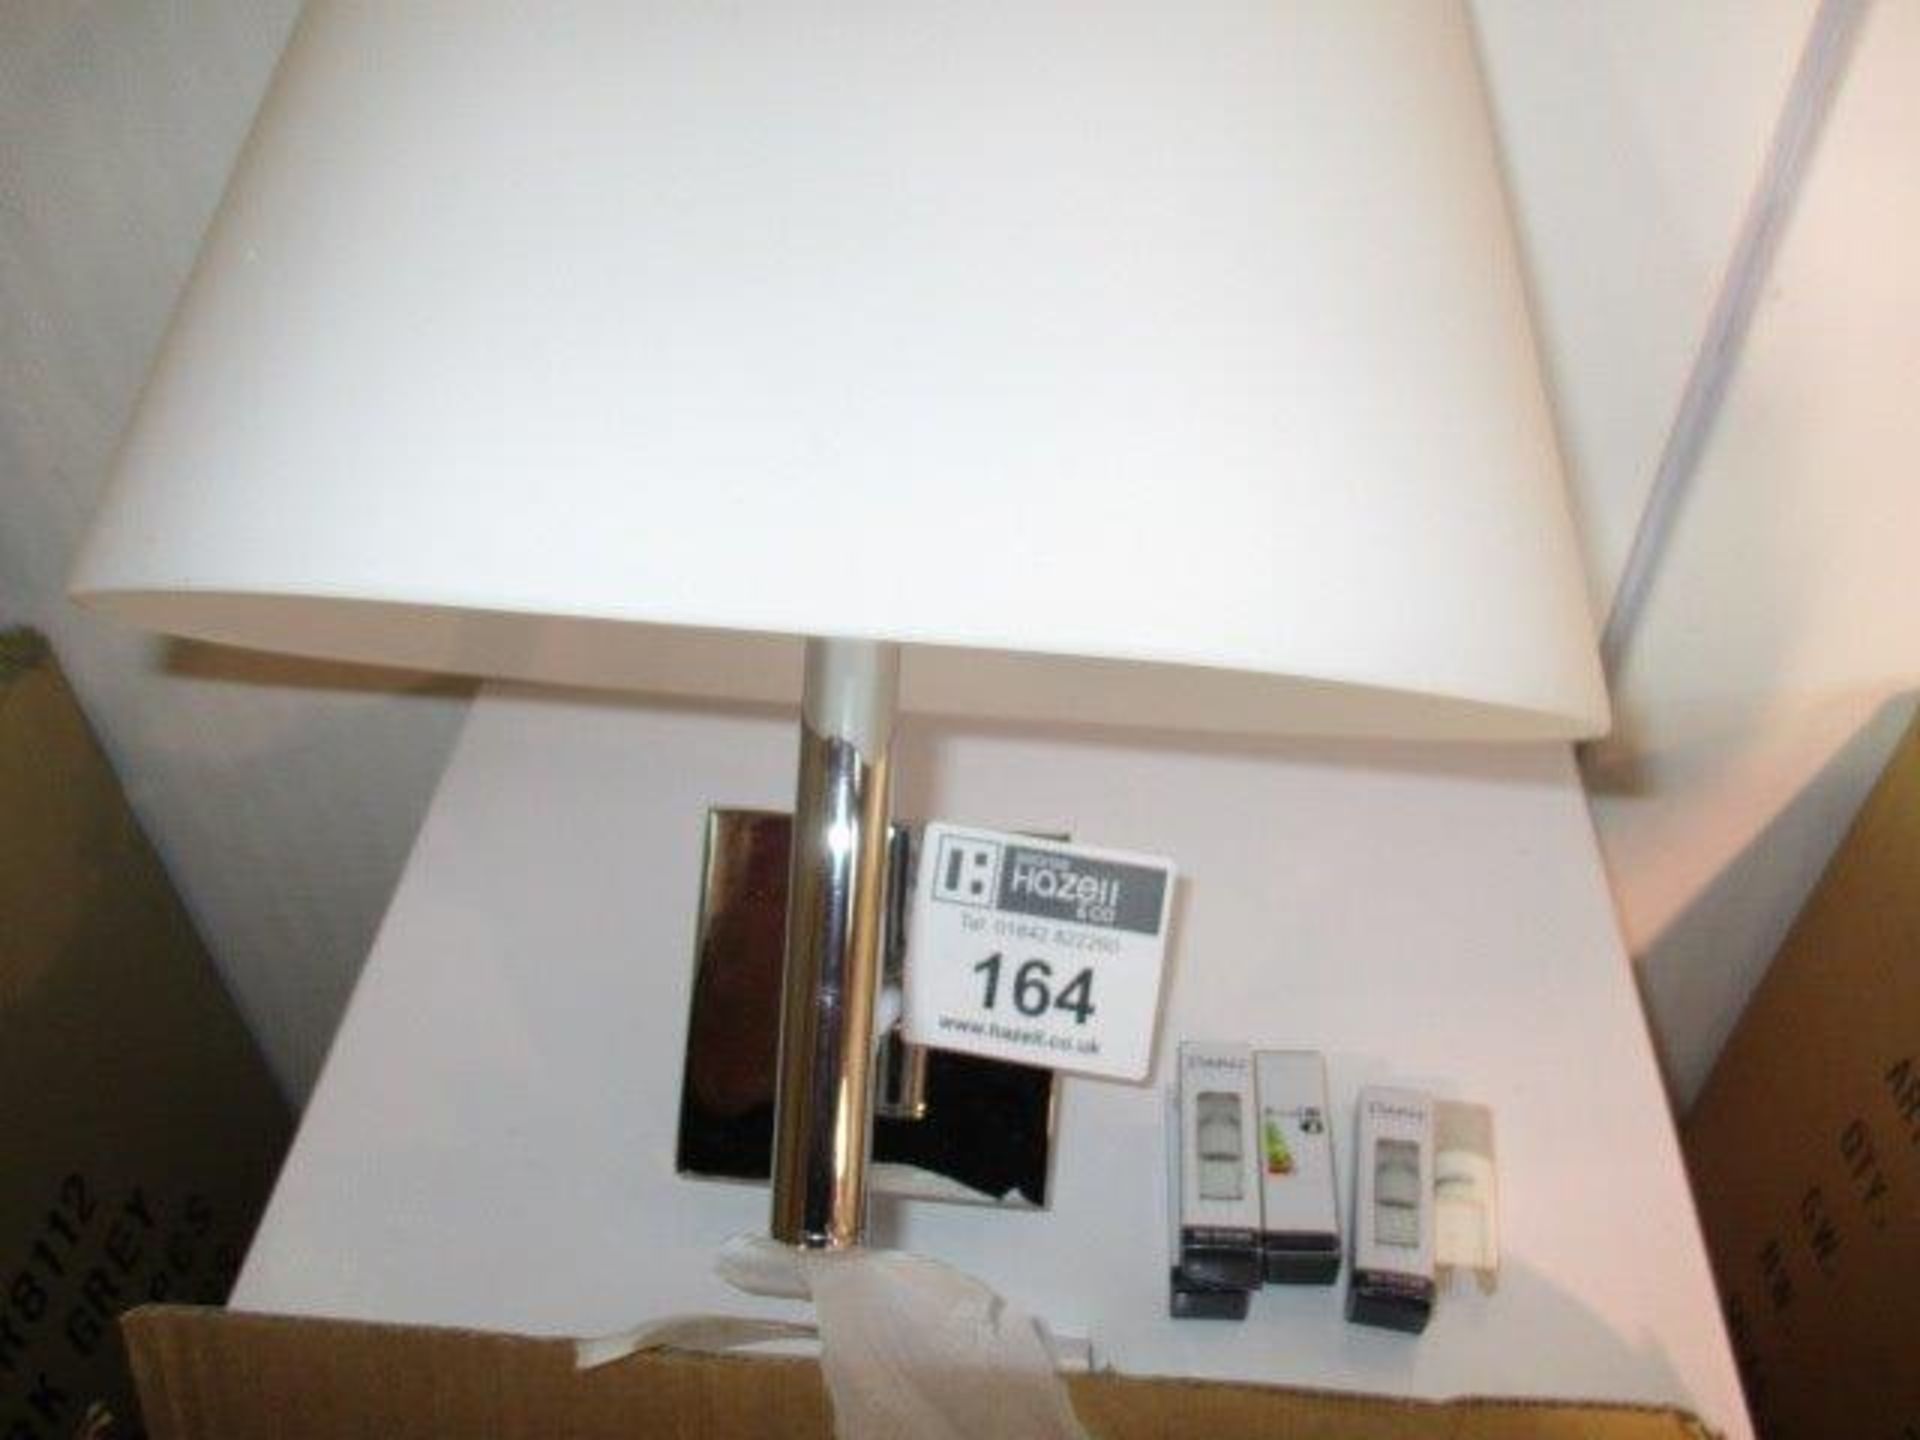 2 X KSR WALL LIGHTS COMES WITH LED G9 LAMPS